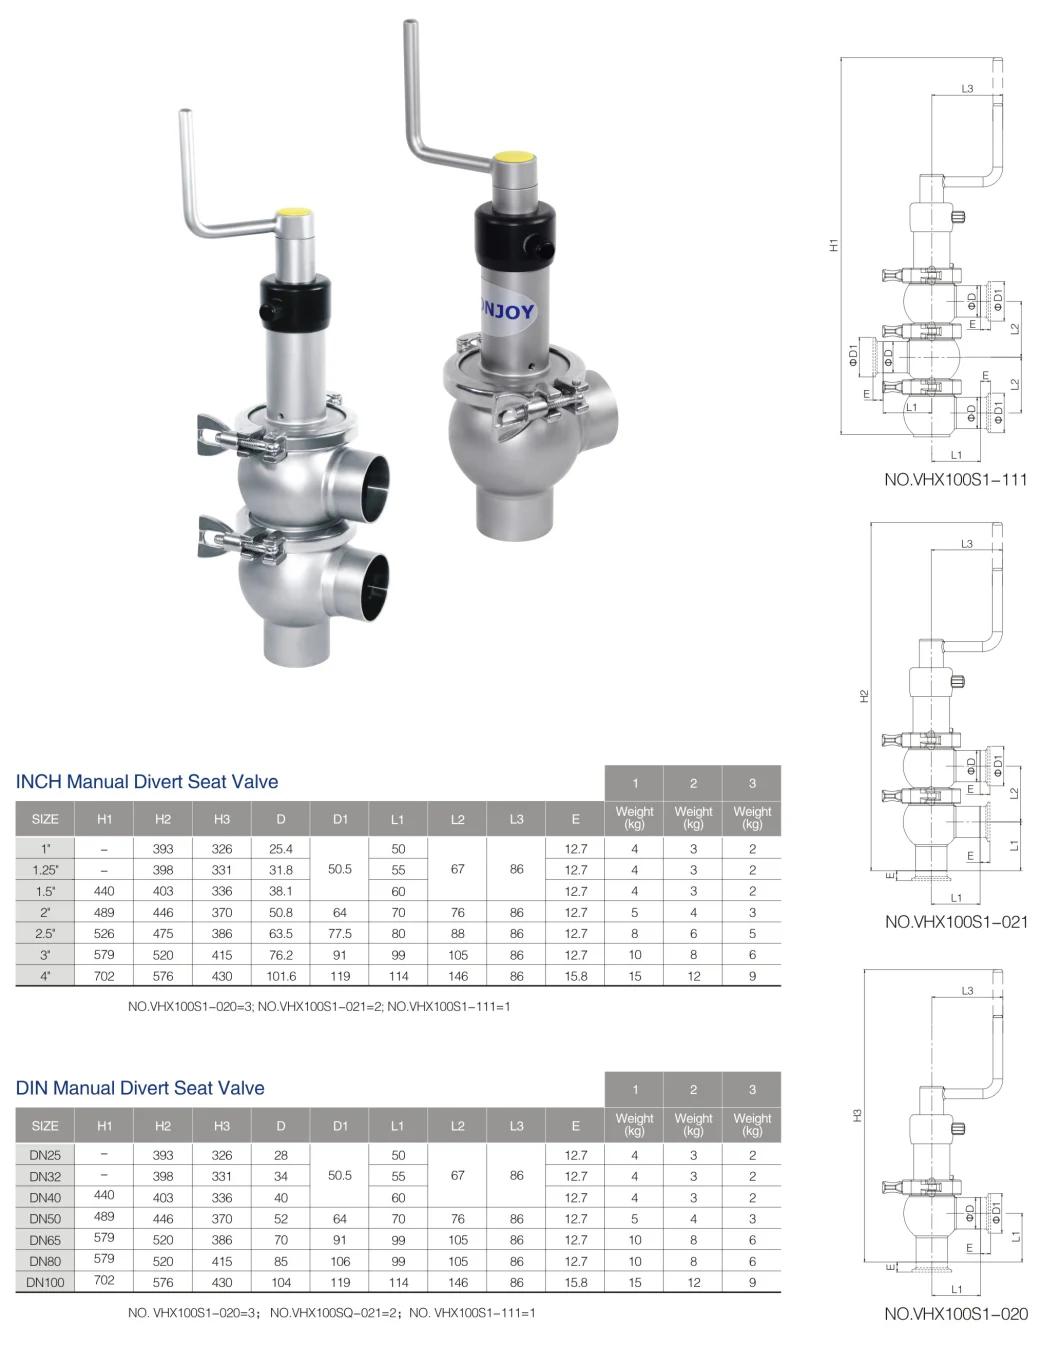 3A Certified Sanitary Shut-off and Diverter Valve for Beverage Dairy